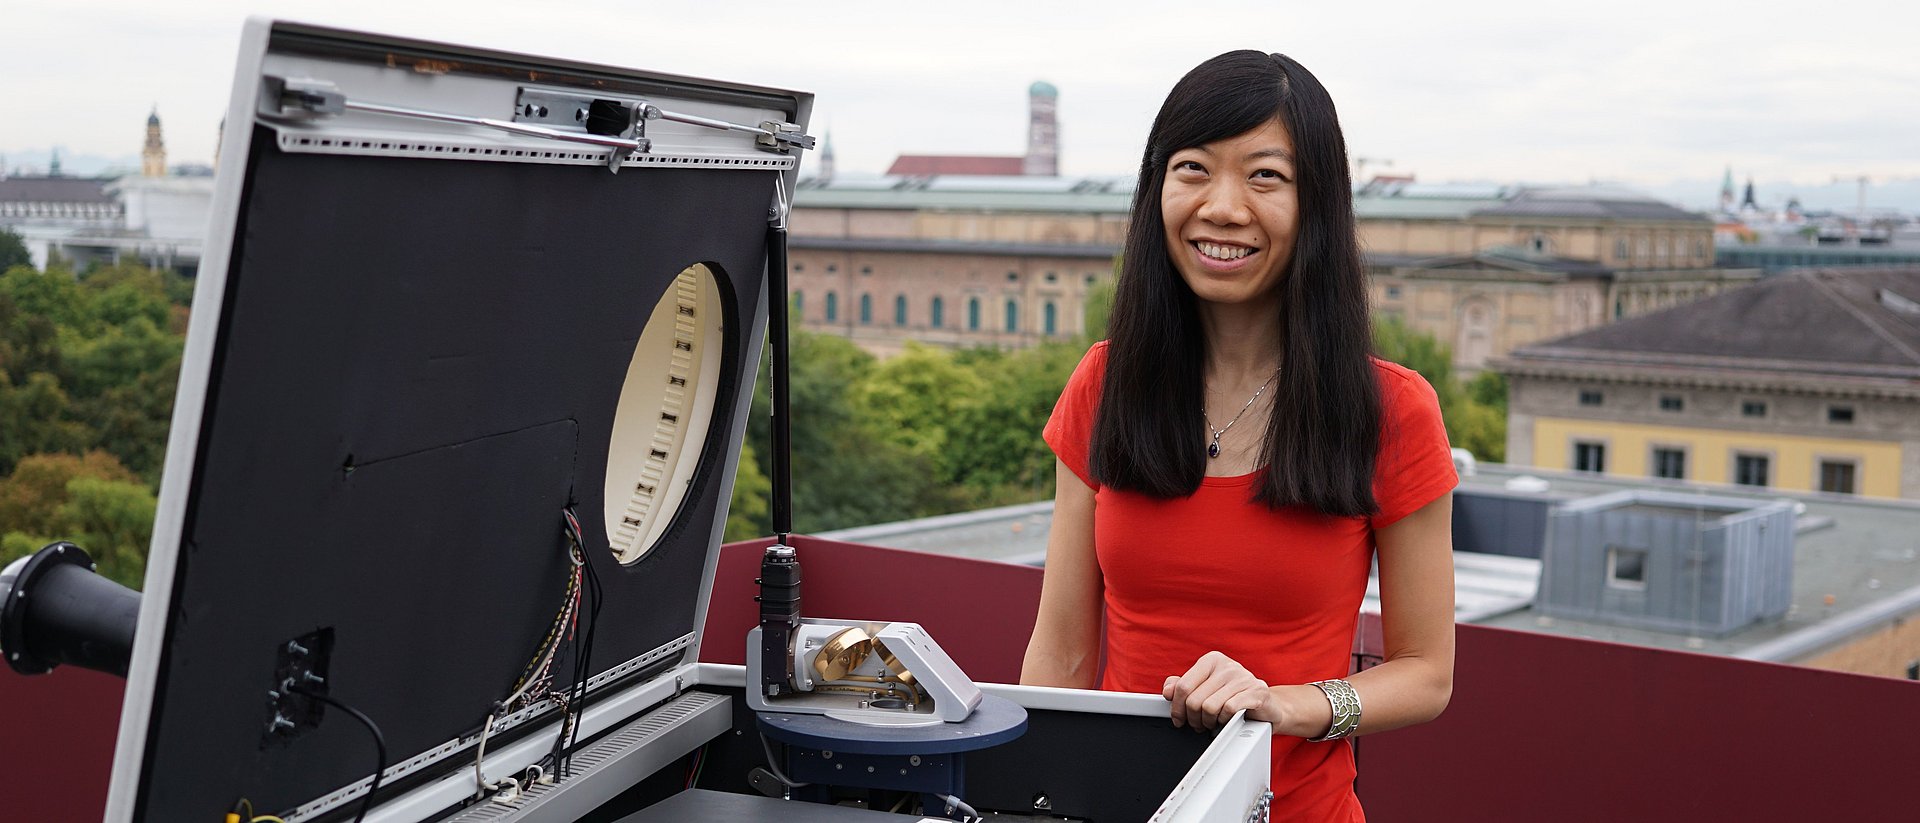 Prof. Jia Chen was included in this year's list of the "Young Elite - Top 40 under 40".